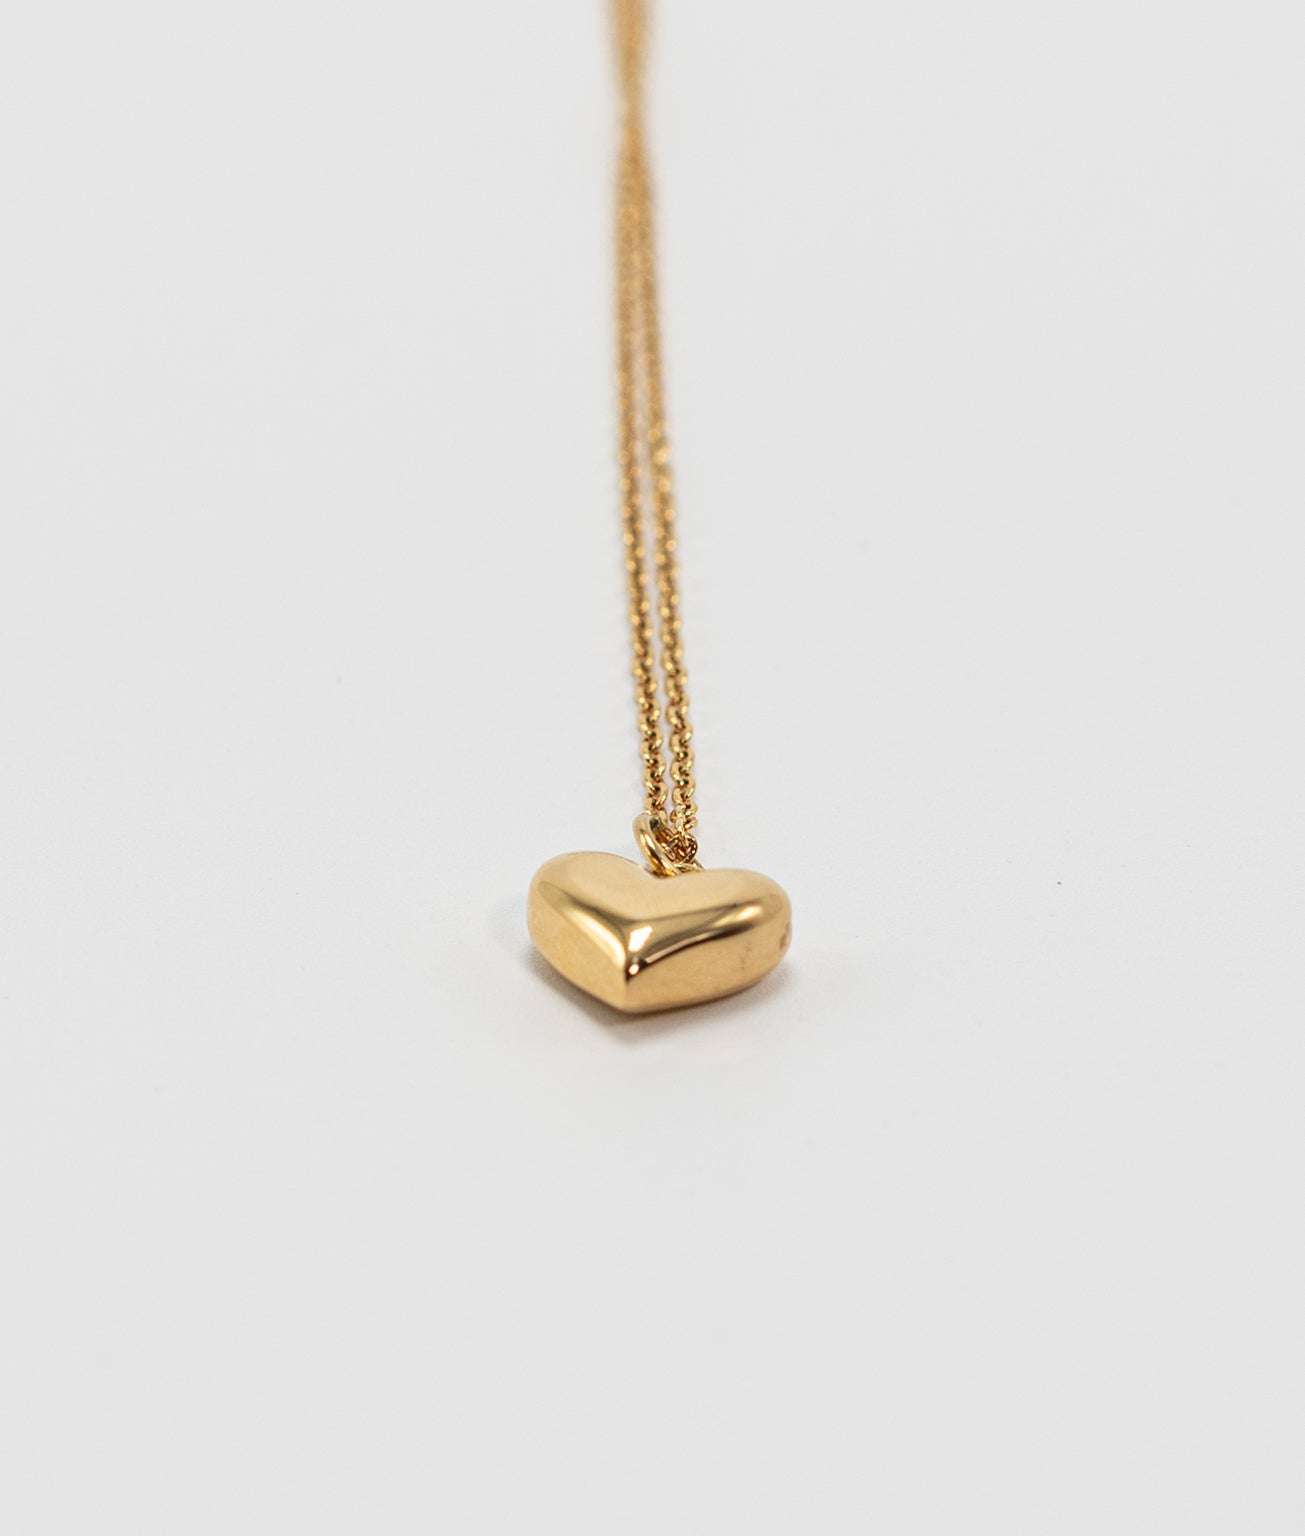 Shop Gold Plated Mia Necklace for Women & Girls